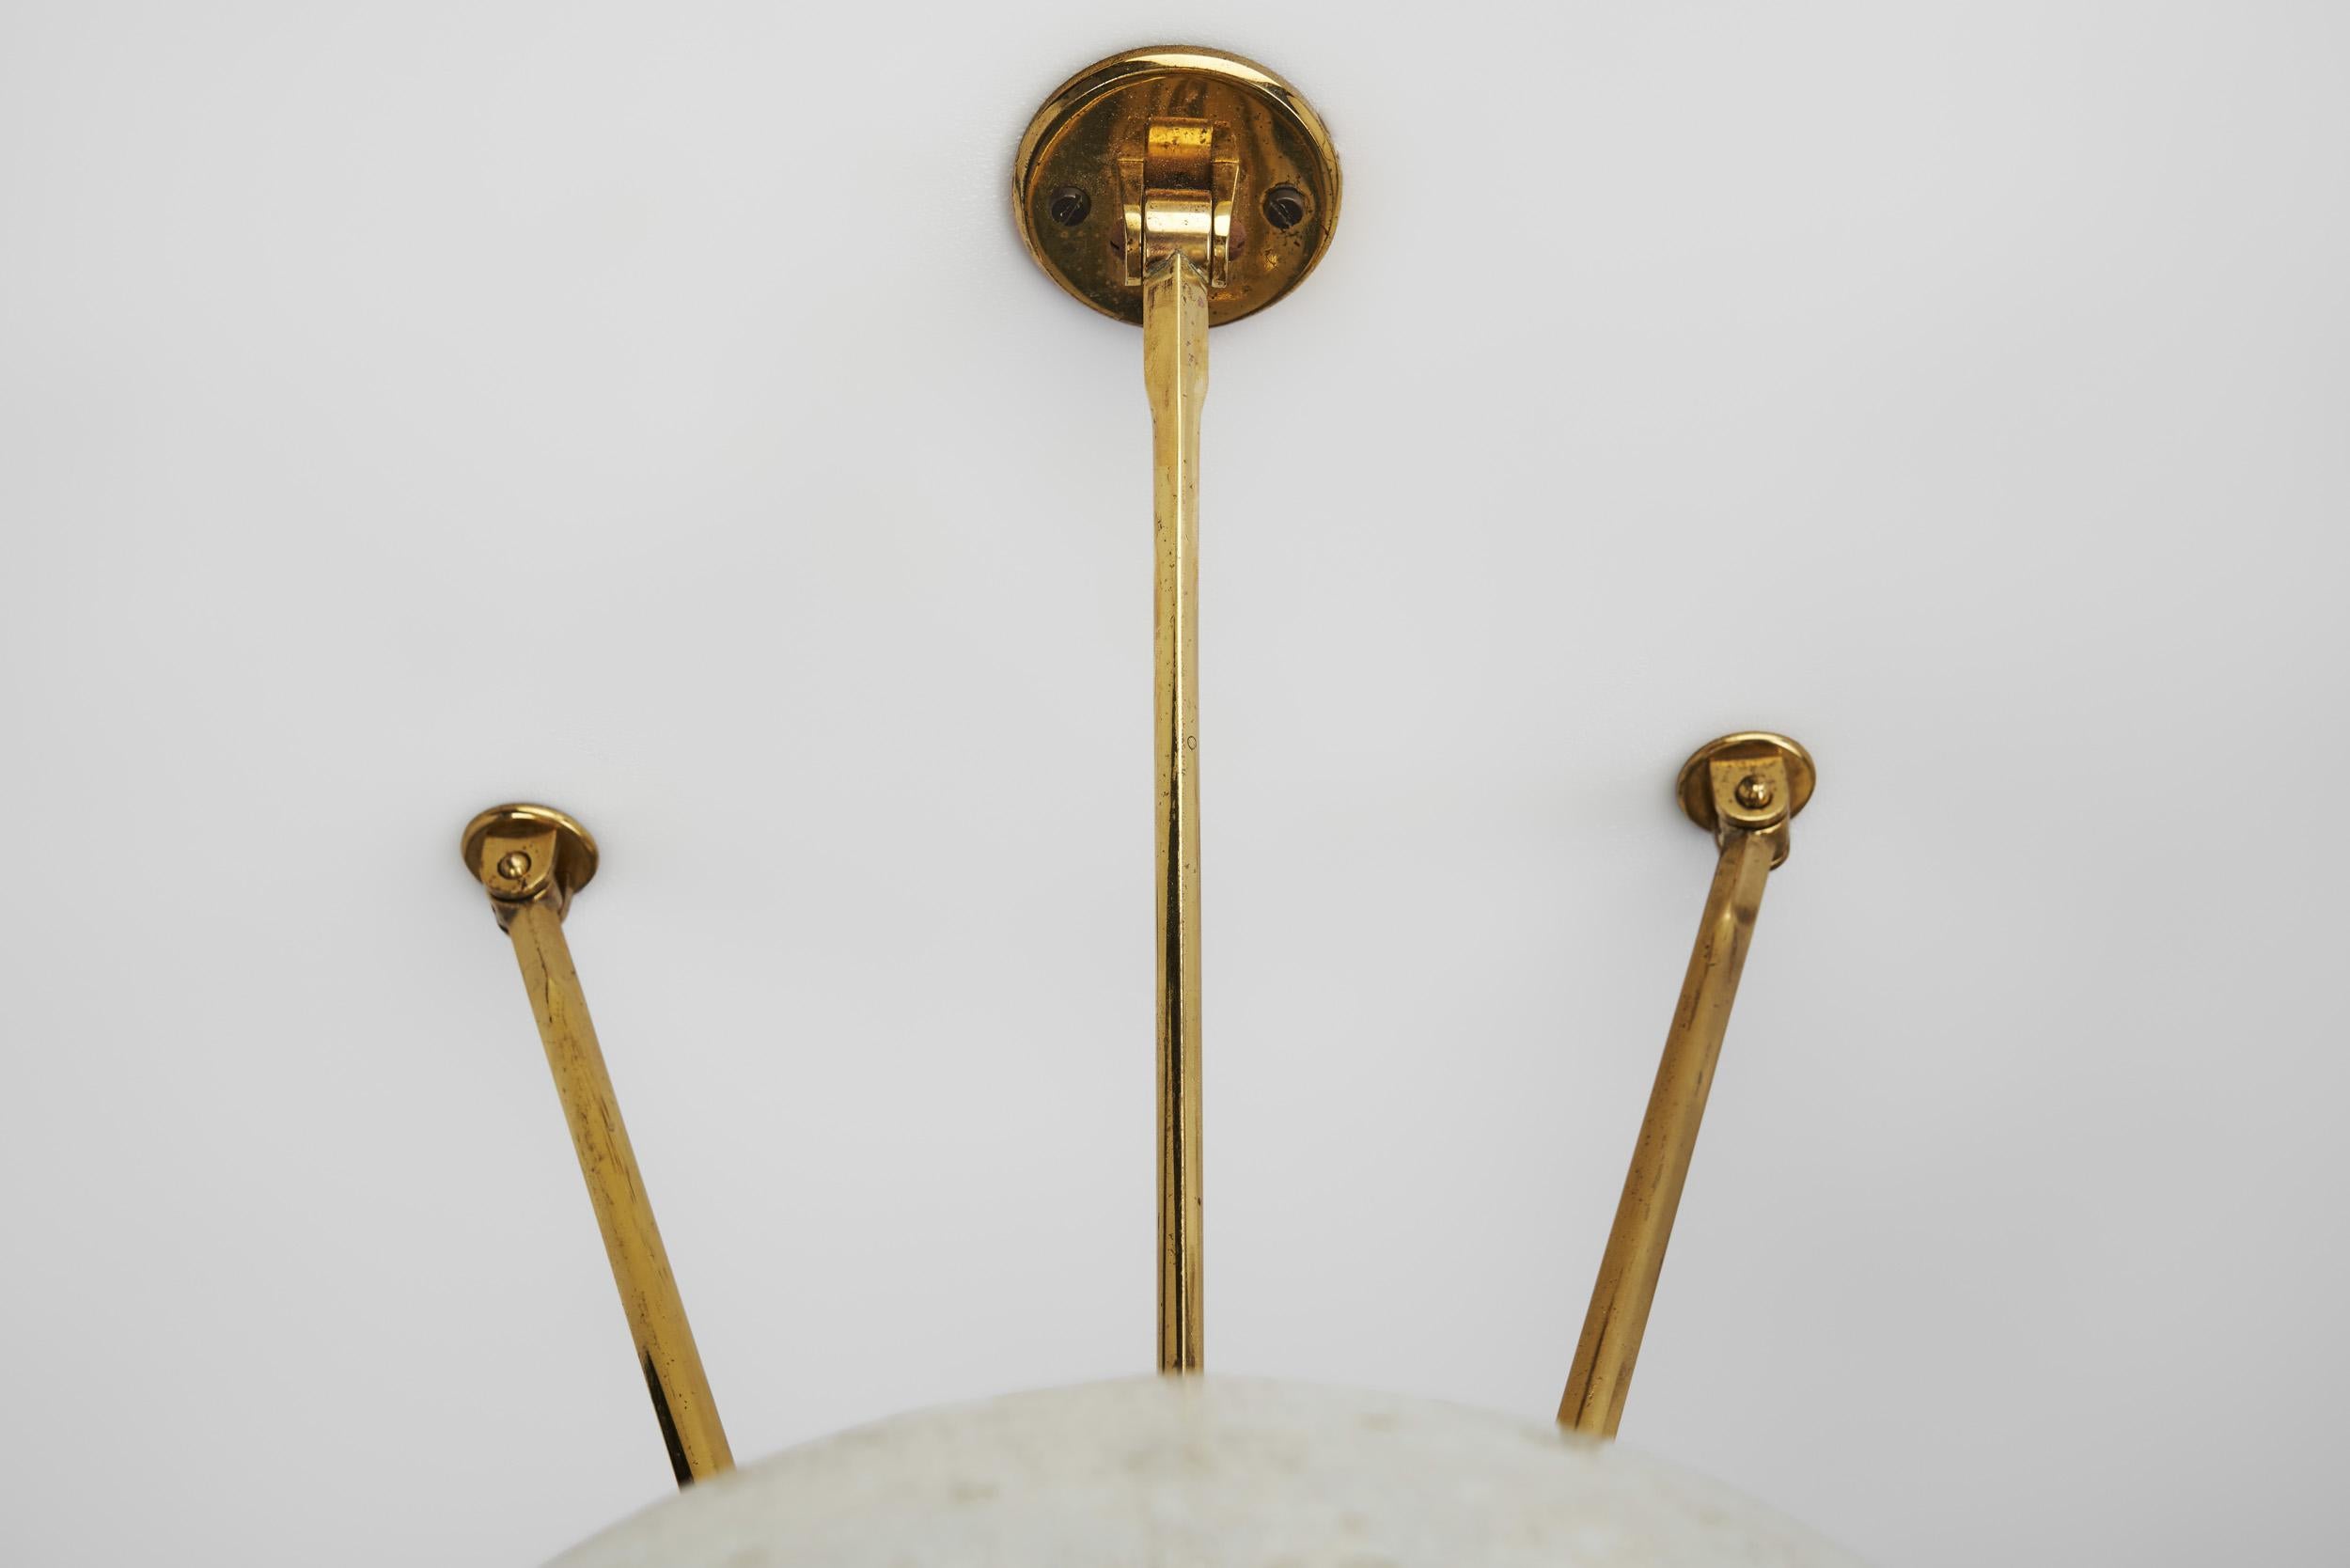 Large European Modern Wall Sconces in Brass & Bubble Glass, Europe, circa 1950s For Sale 9